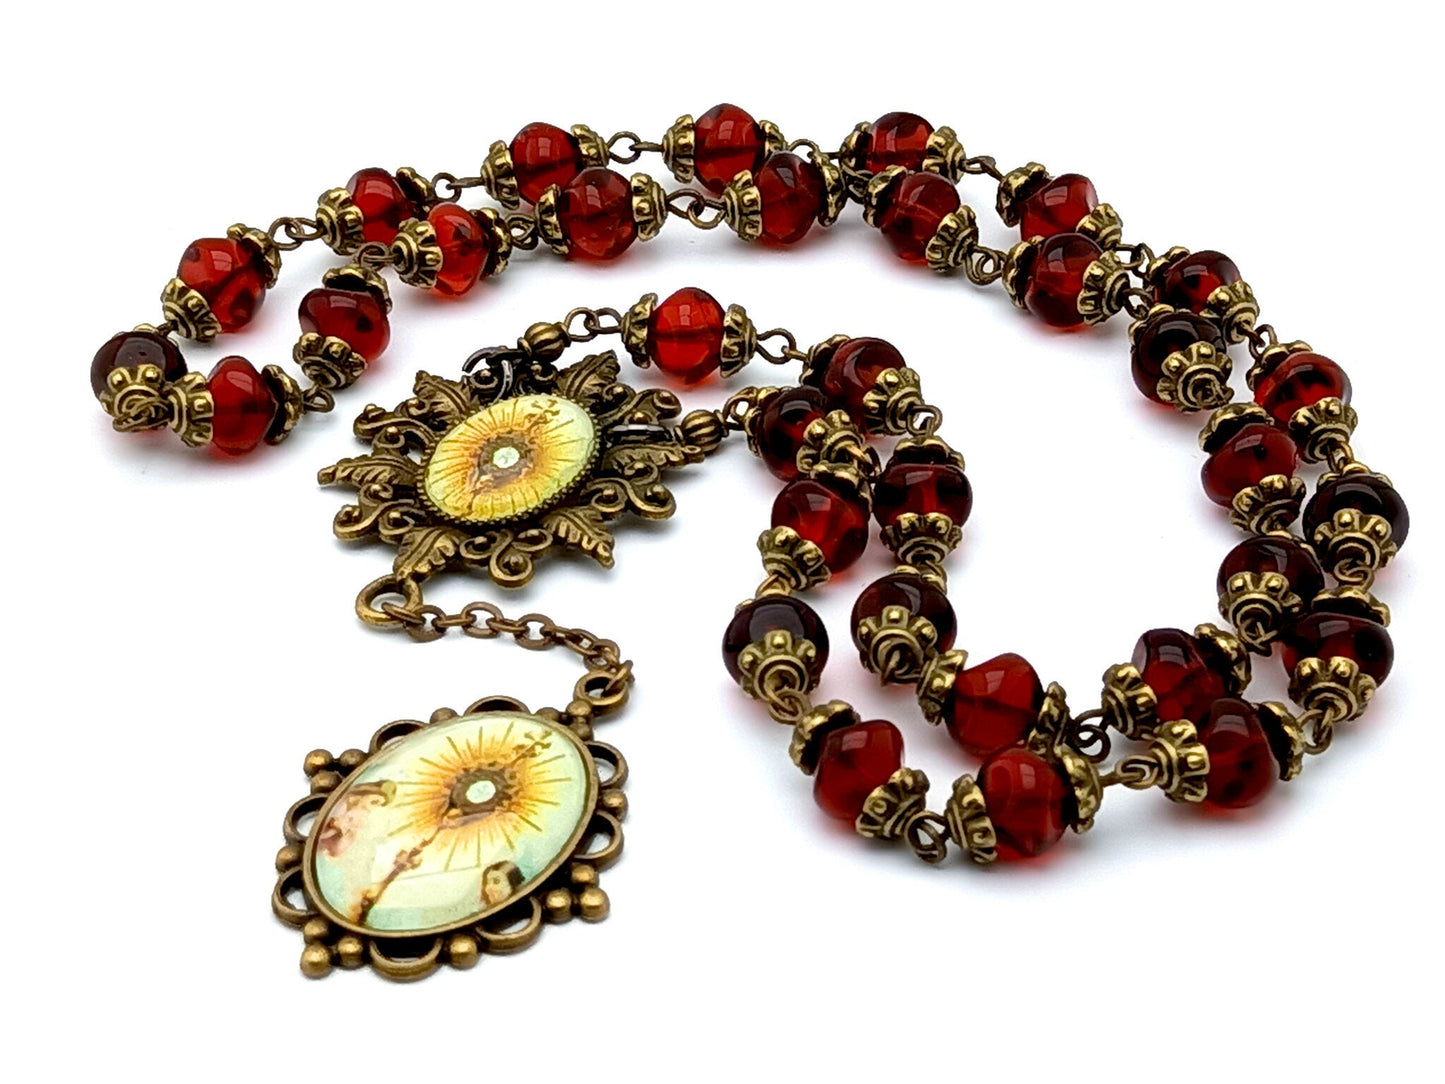 Blessed Sacrament unique rosary beads prayer chaplet with red nugget glass beads, bronze picture centre and end medals.